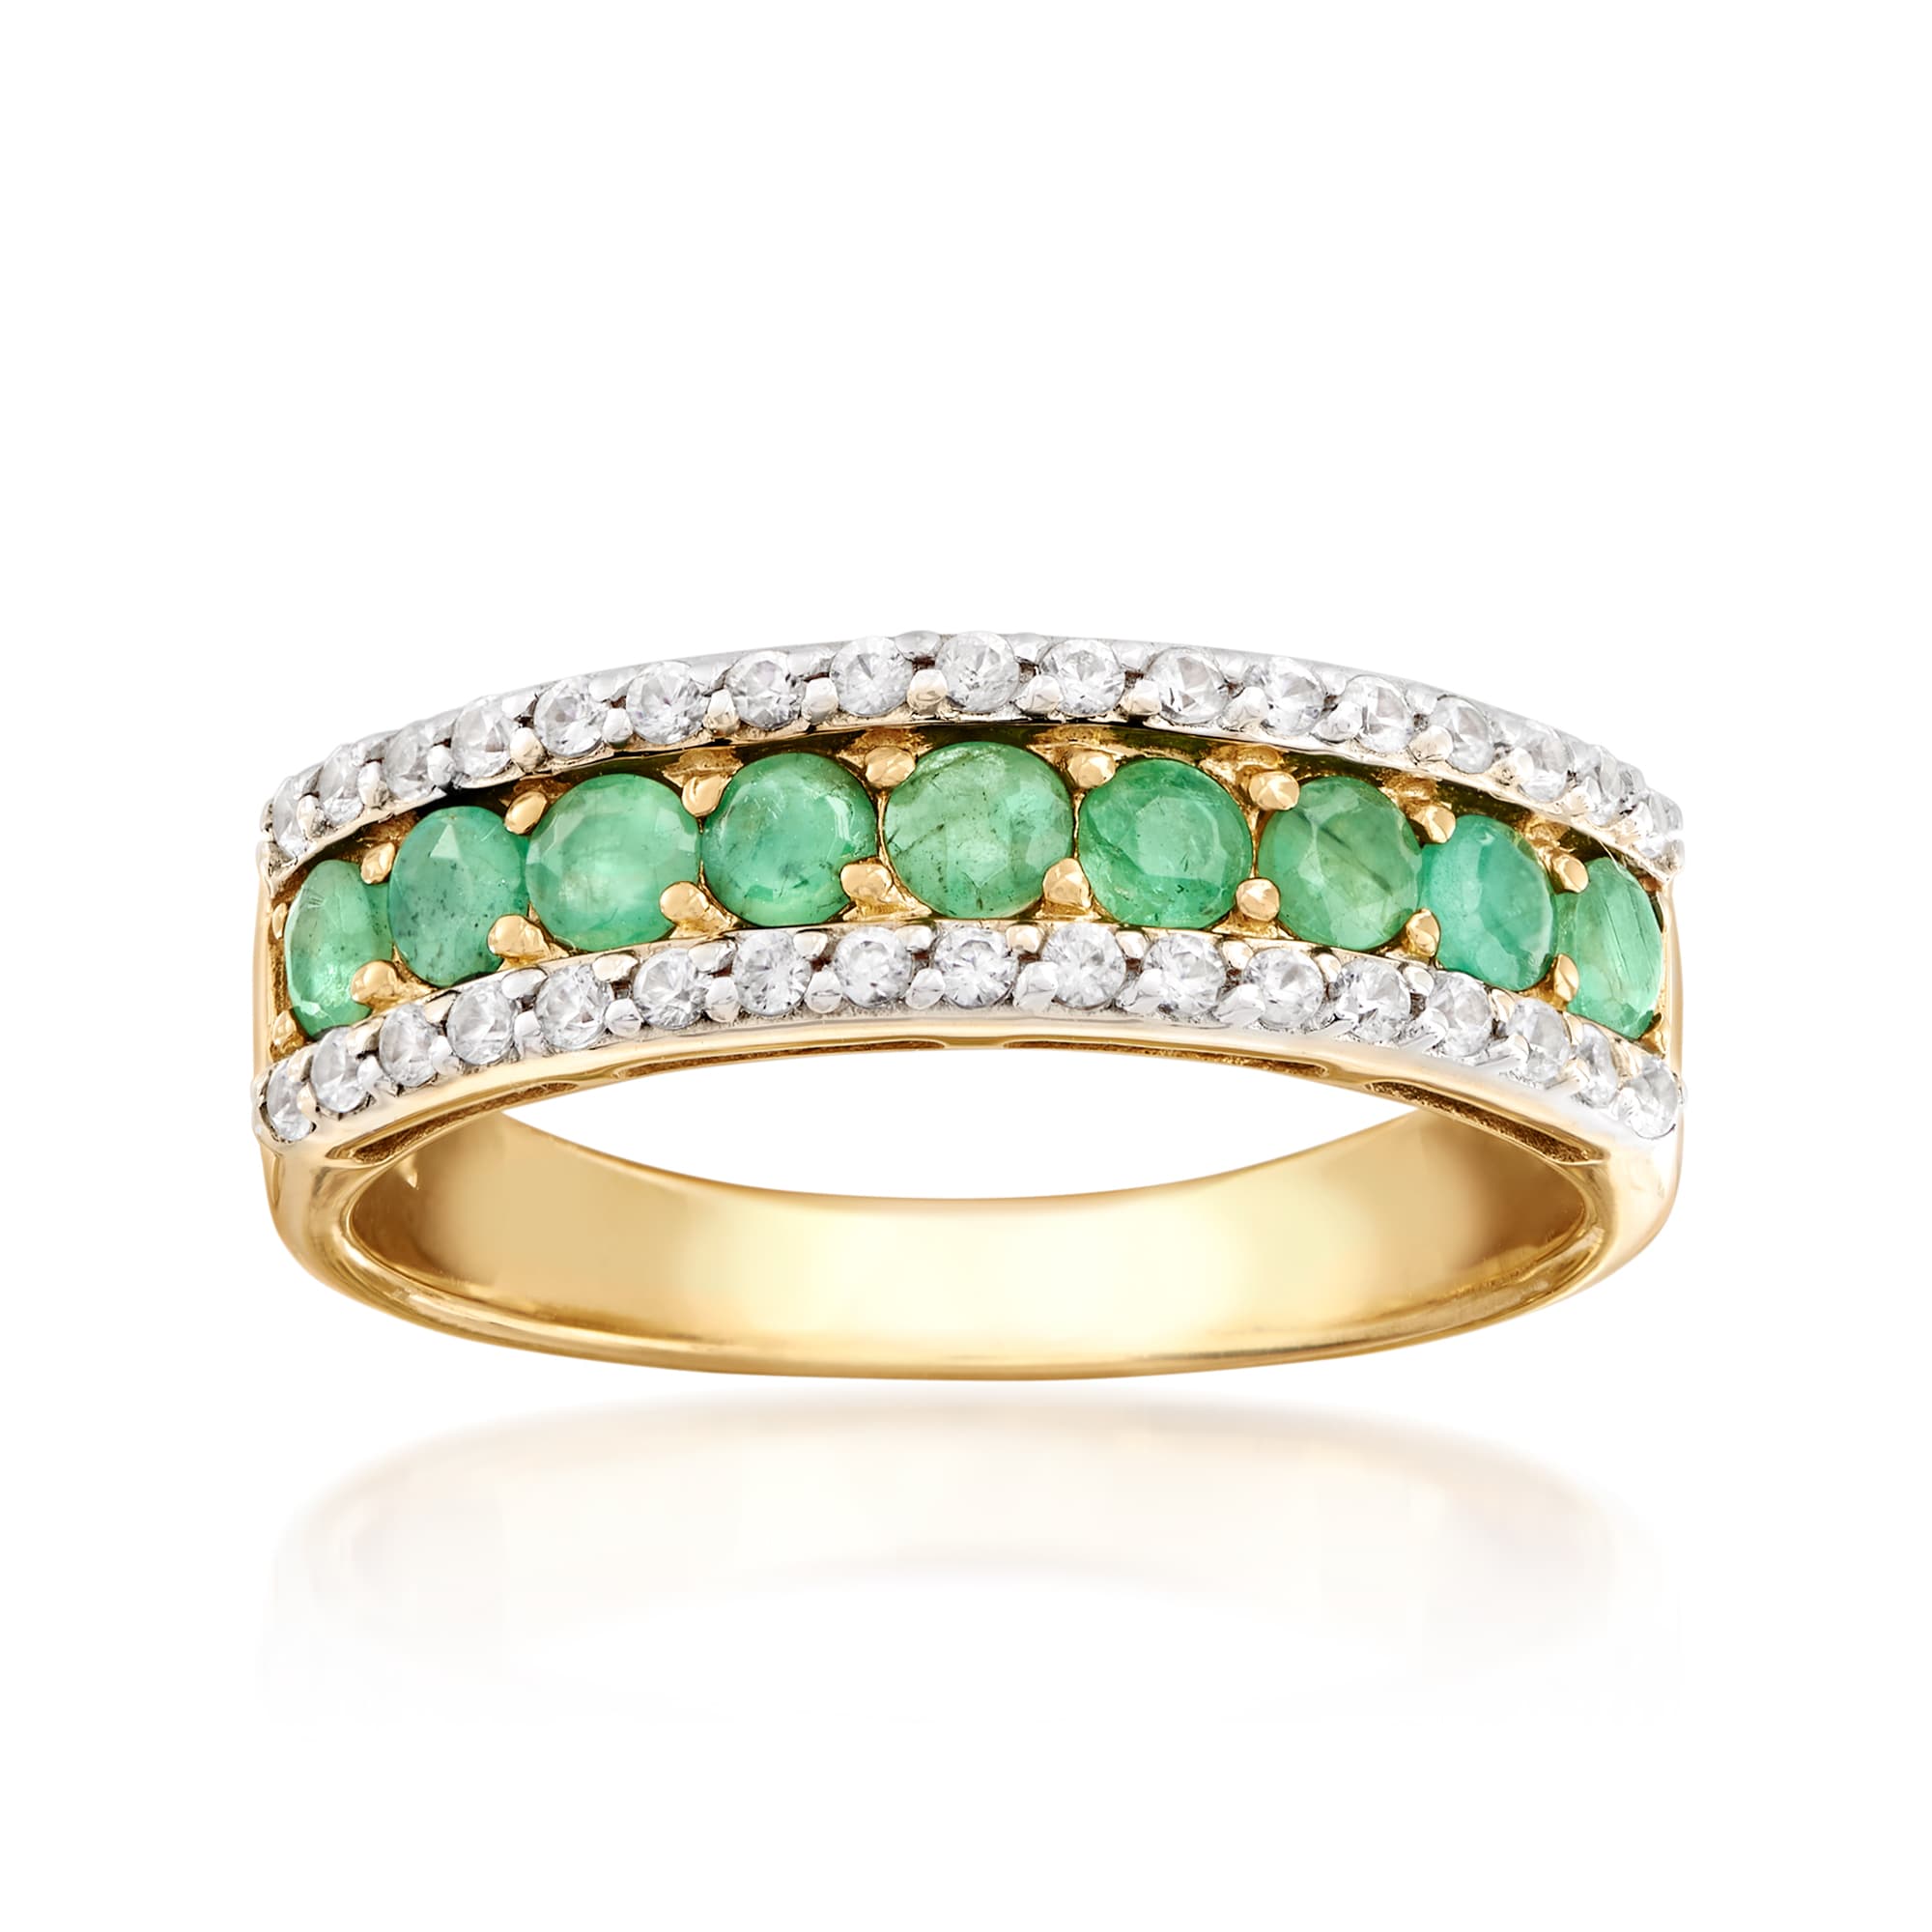 .90 ct. t.w. Emerald and .30 ct. t.w. White Zircon Ring in 14kt Gold ...